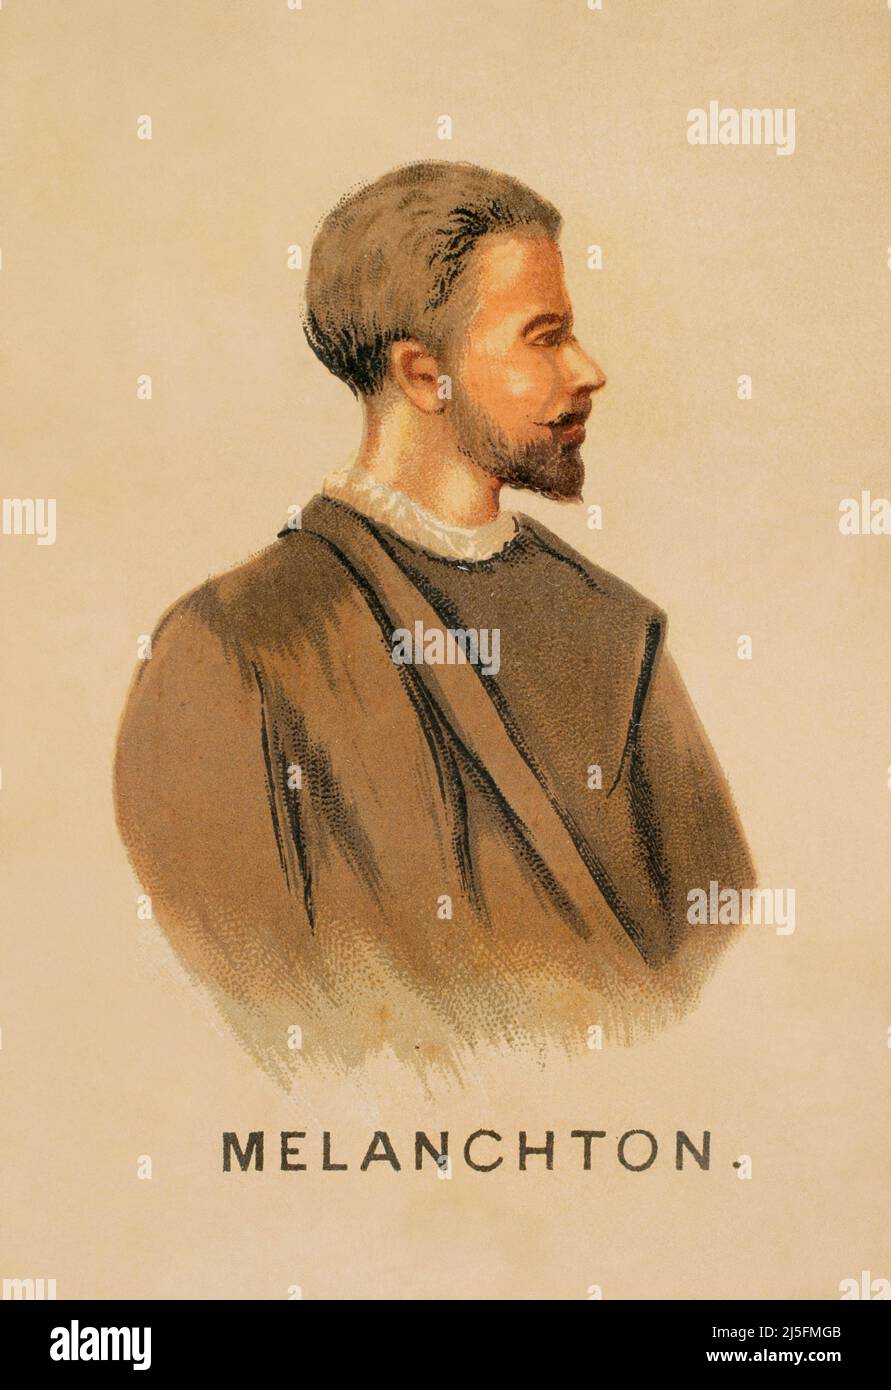 Philipp Melanchthon (1497-1560). German religious reformer. Portrait. Chromolithography. Historia Universal, by César Cantú. Volume VIII. Published in Barcelona, 1886. Stock Photo